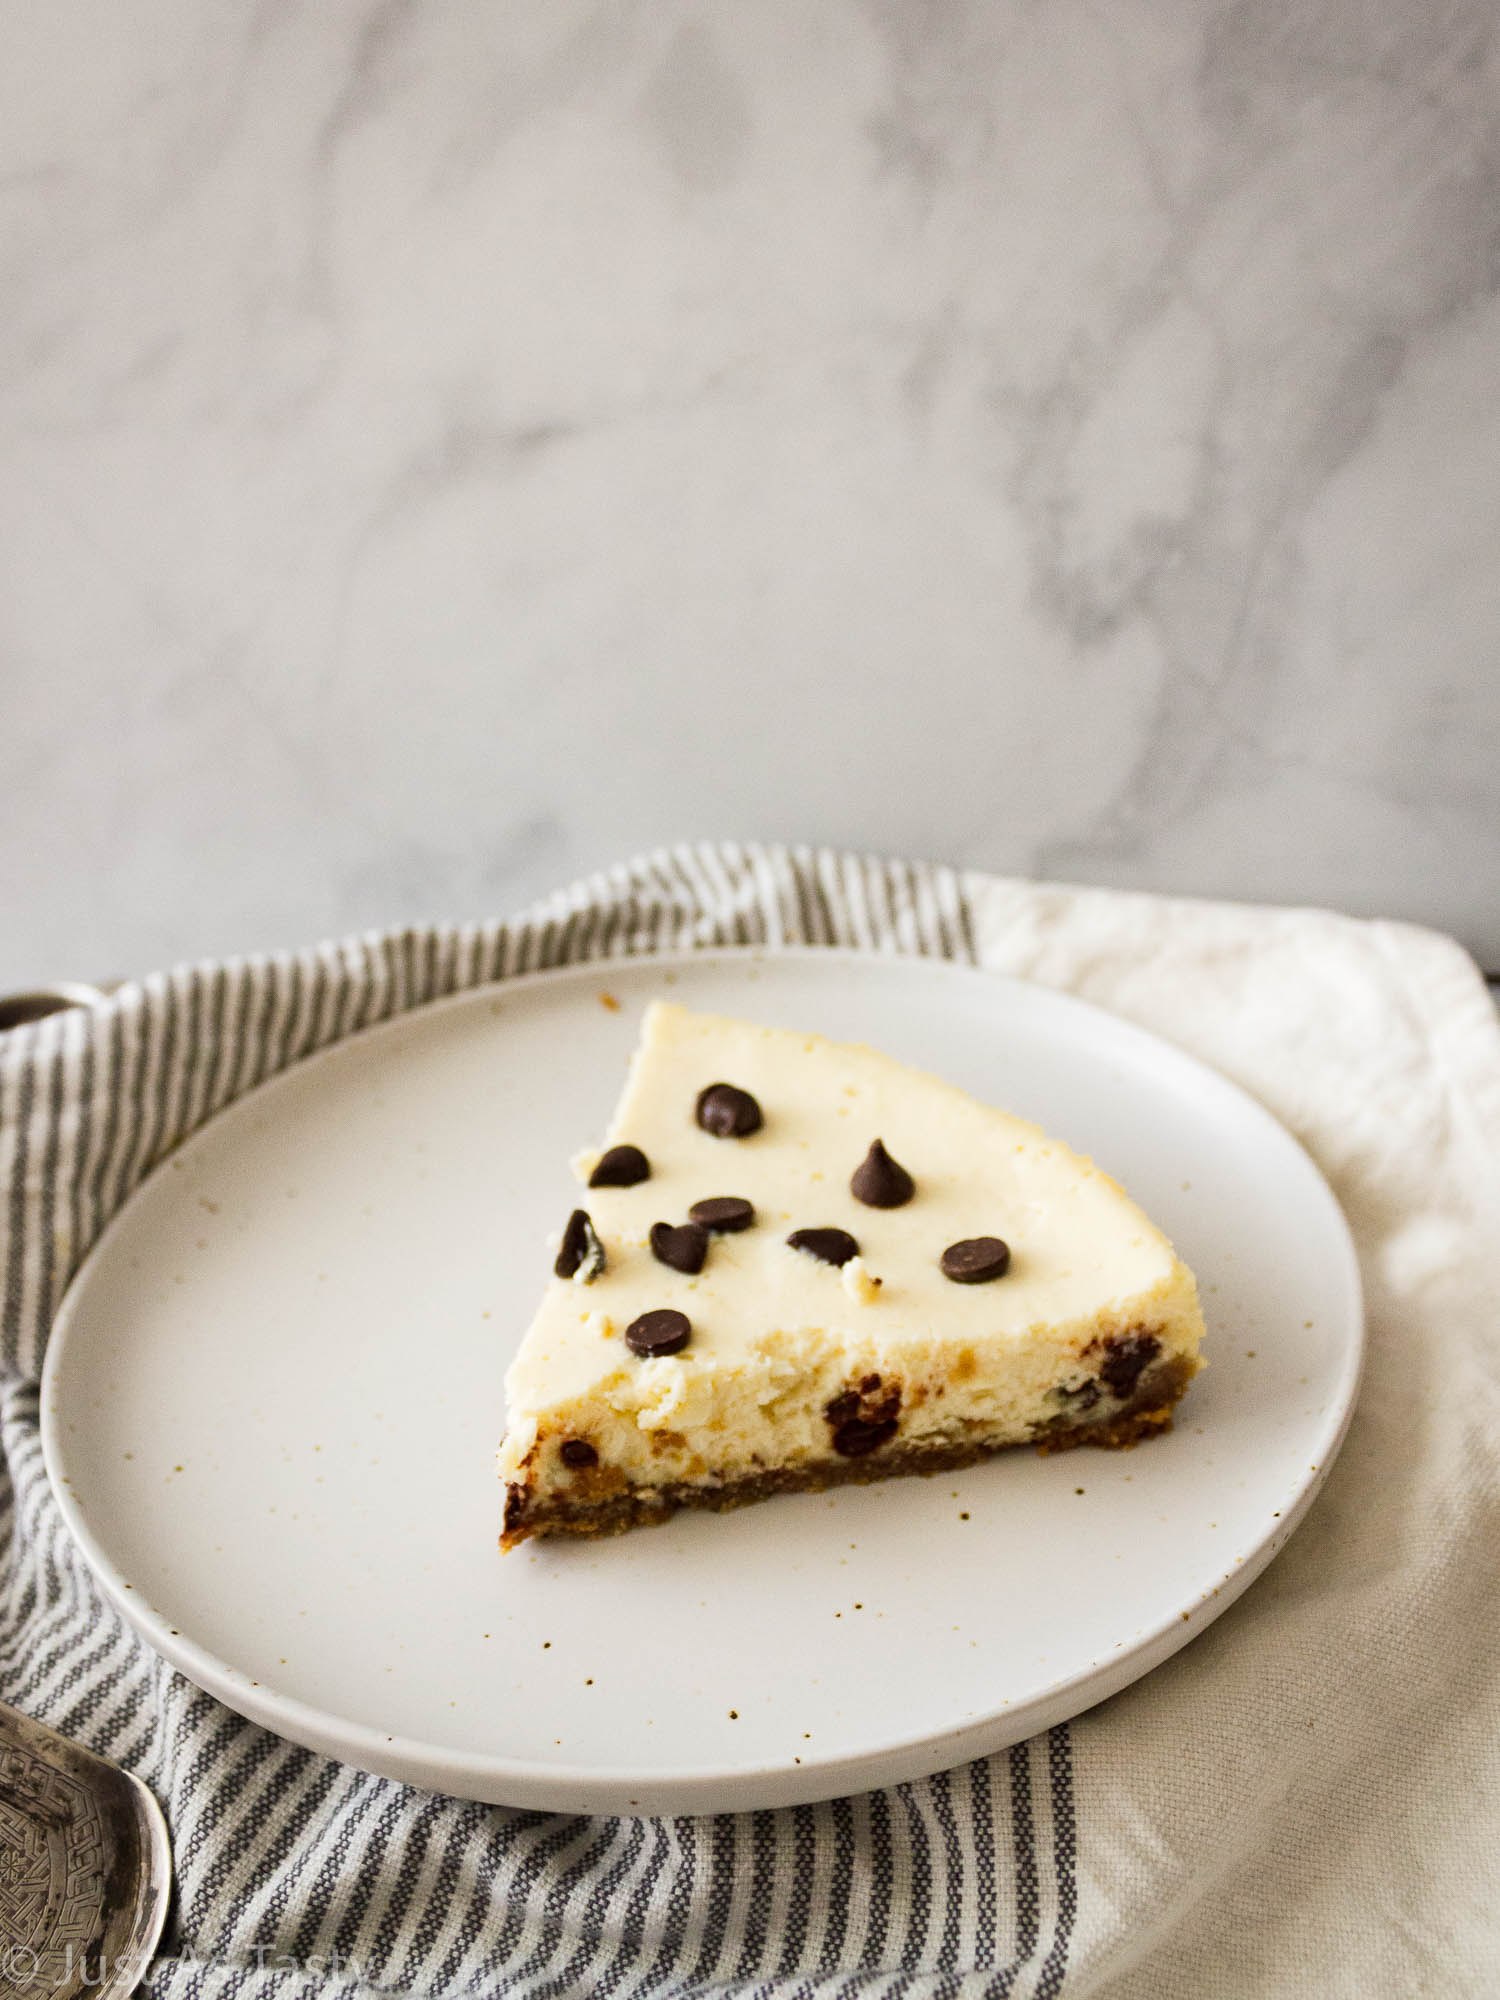 Slice of chocolate chip cheesecake on a white plate.